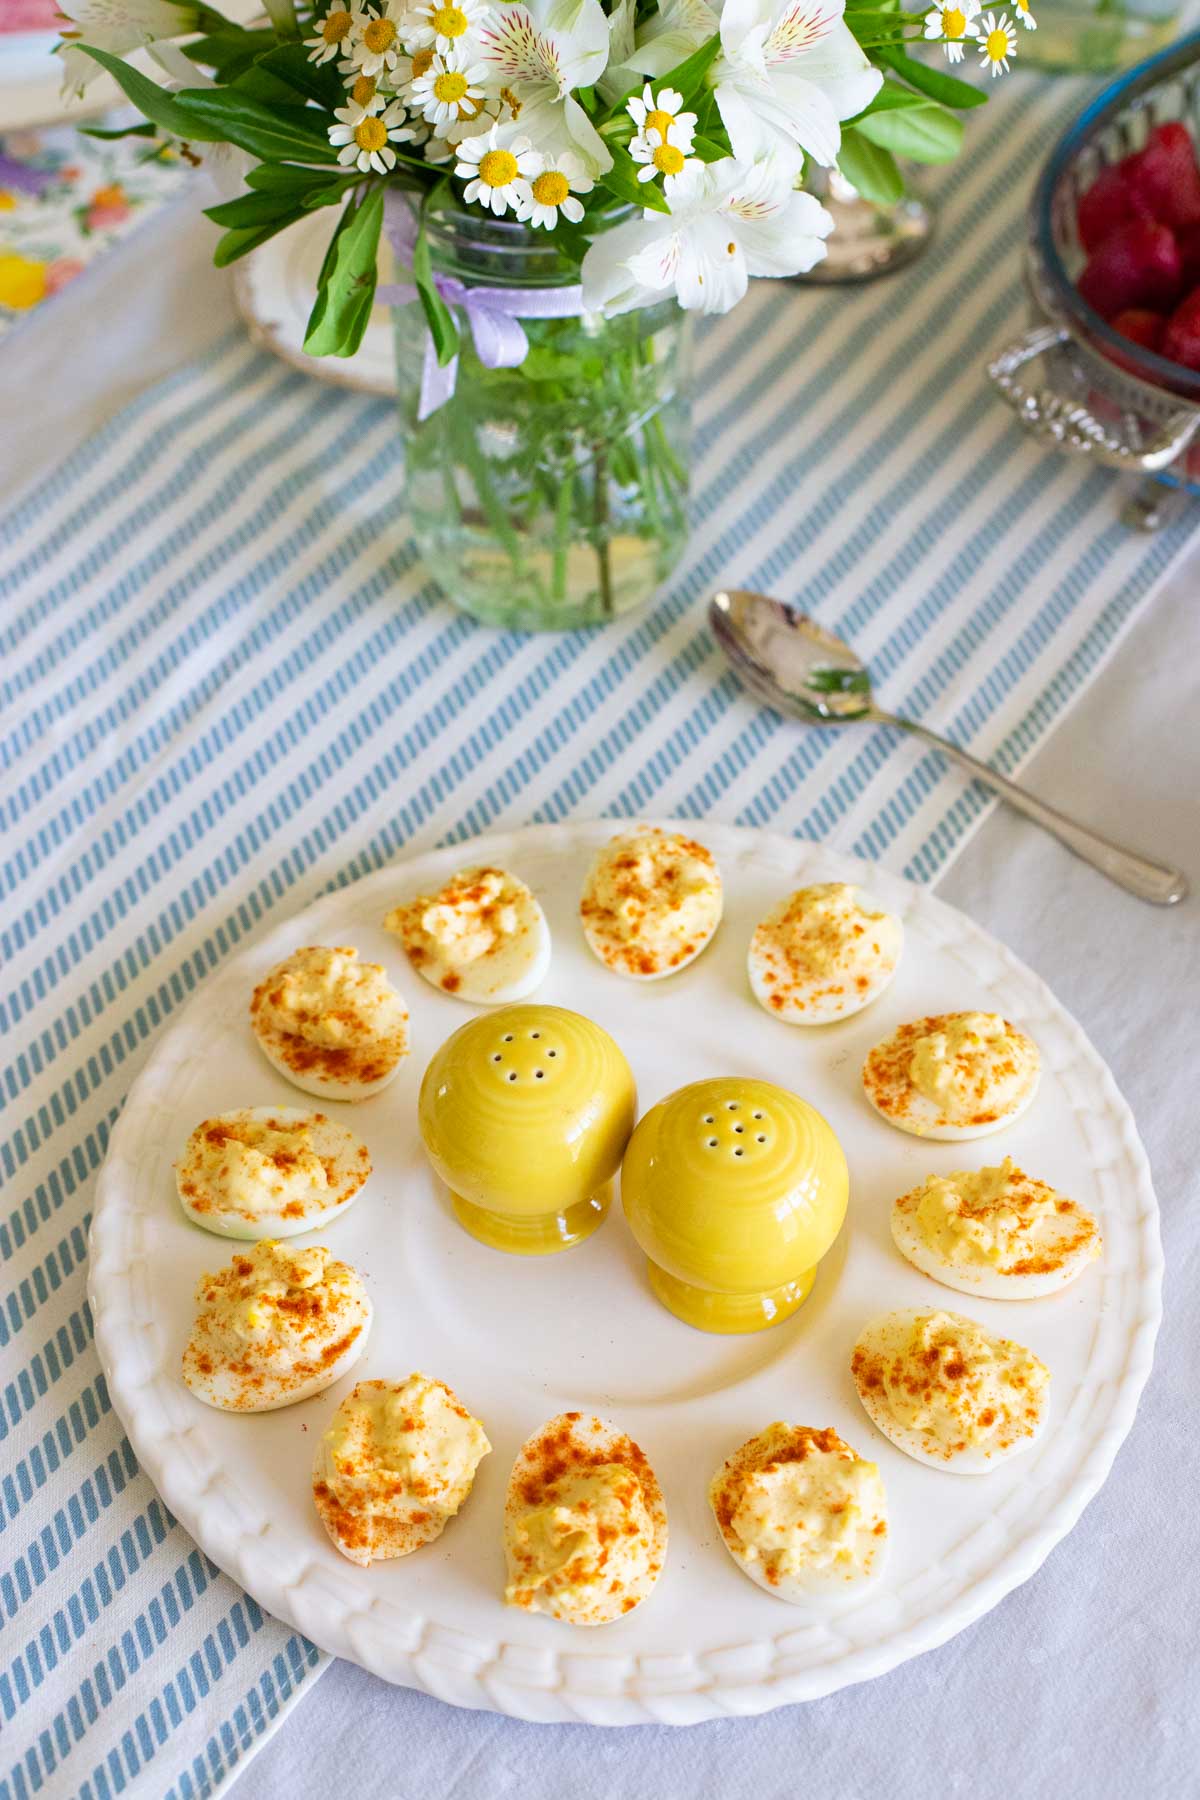 A platter of deviled eggs have a yellow salt and pepper shaker in the center.